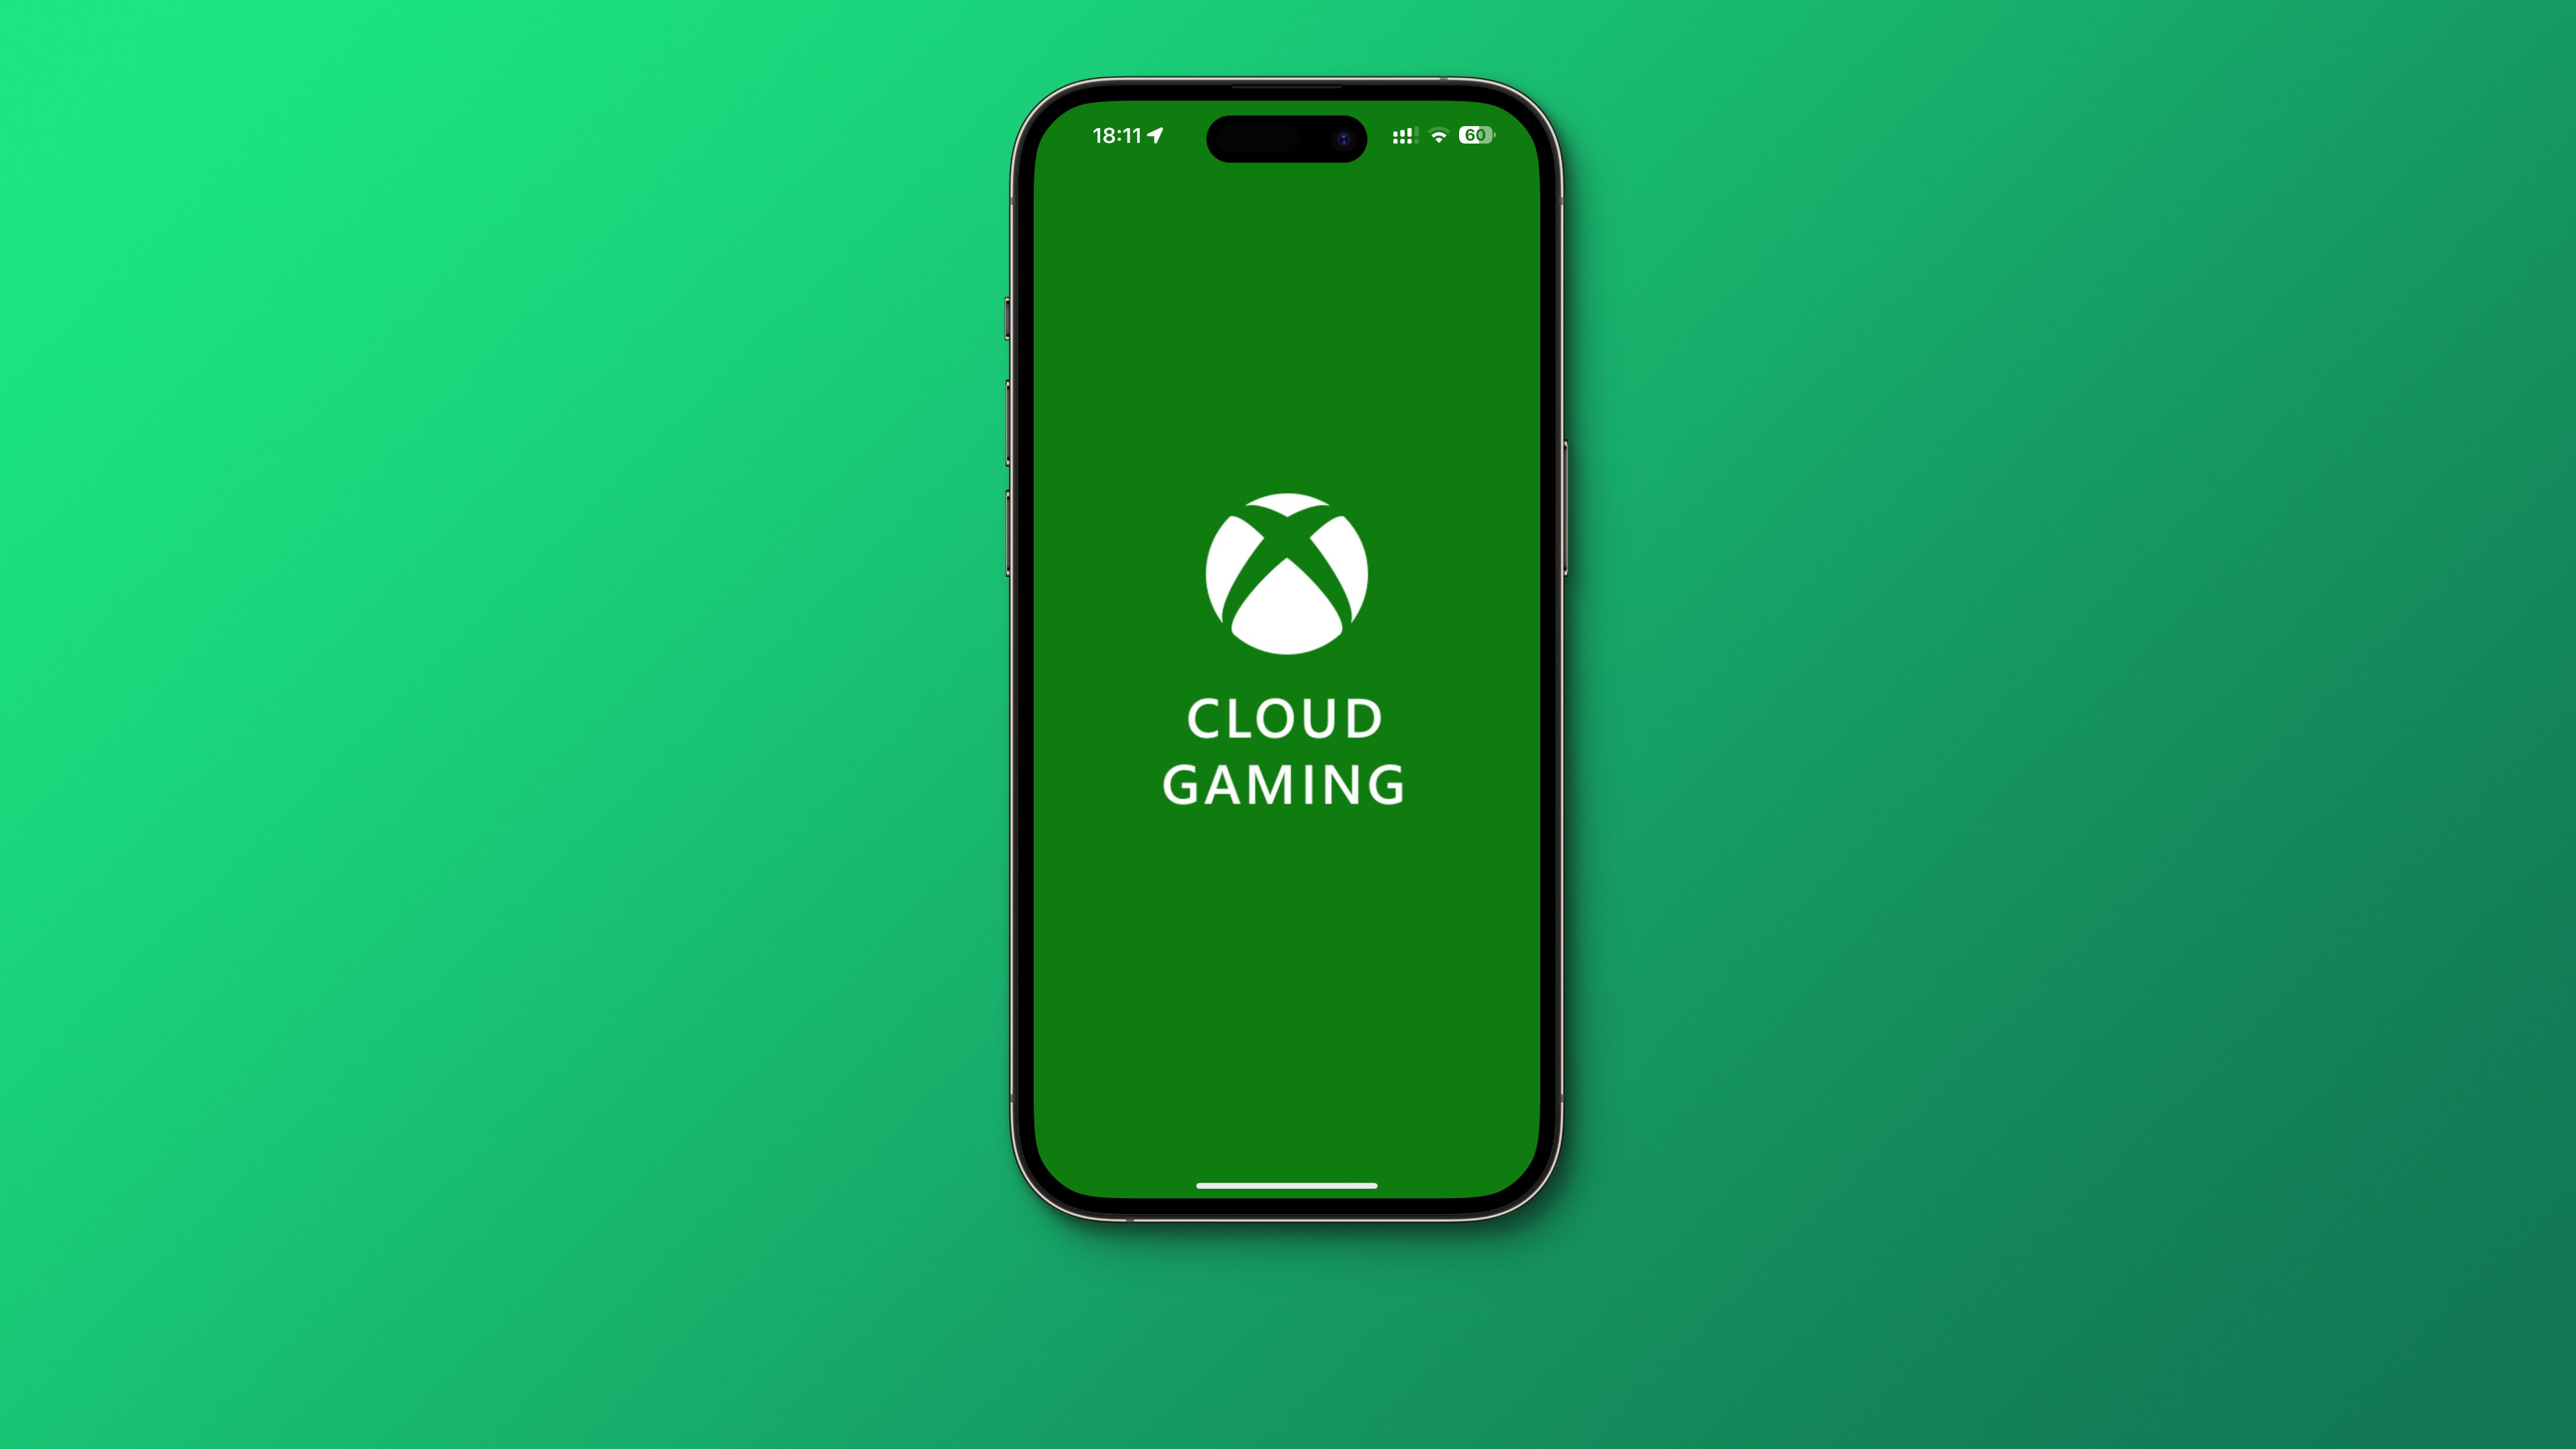 iPhone displaying the Xbox cloud gaming logo on a gradient green background